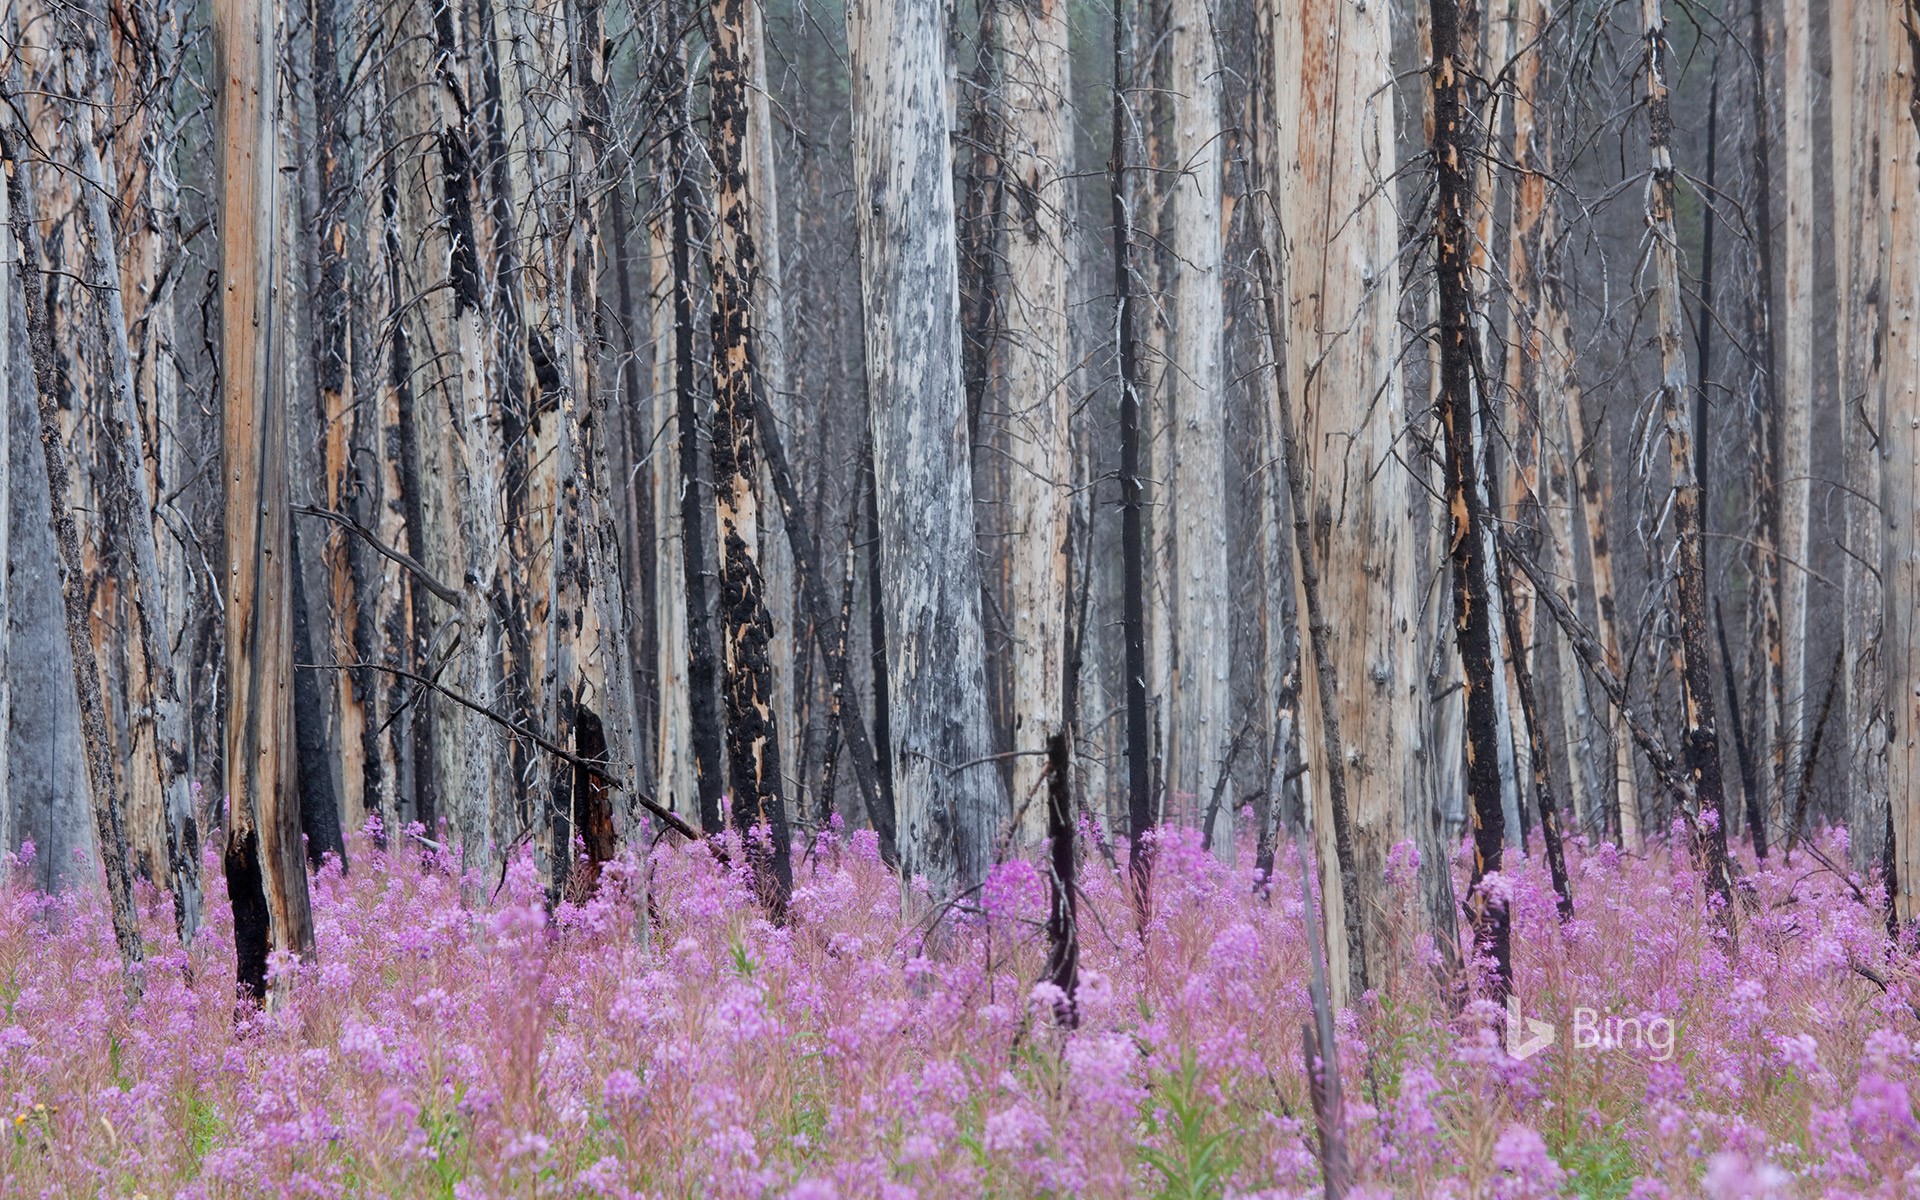 Burnt forest with fireweed in Banff National Park, Alberta, Canada